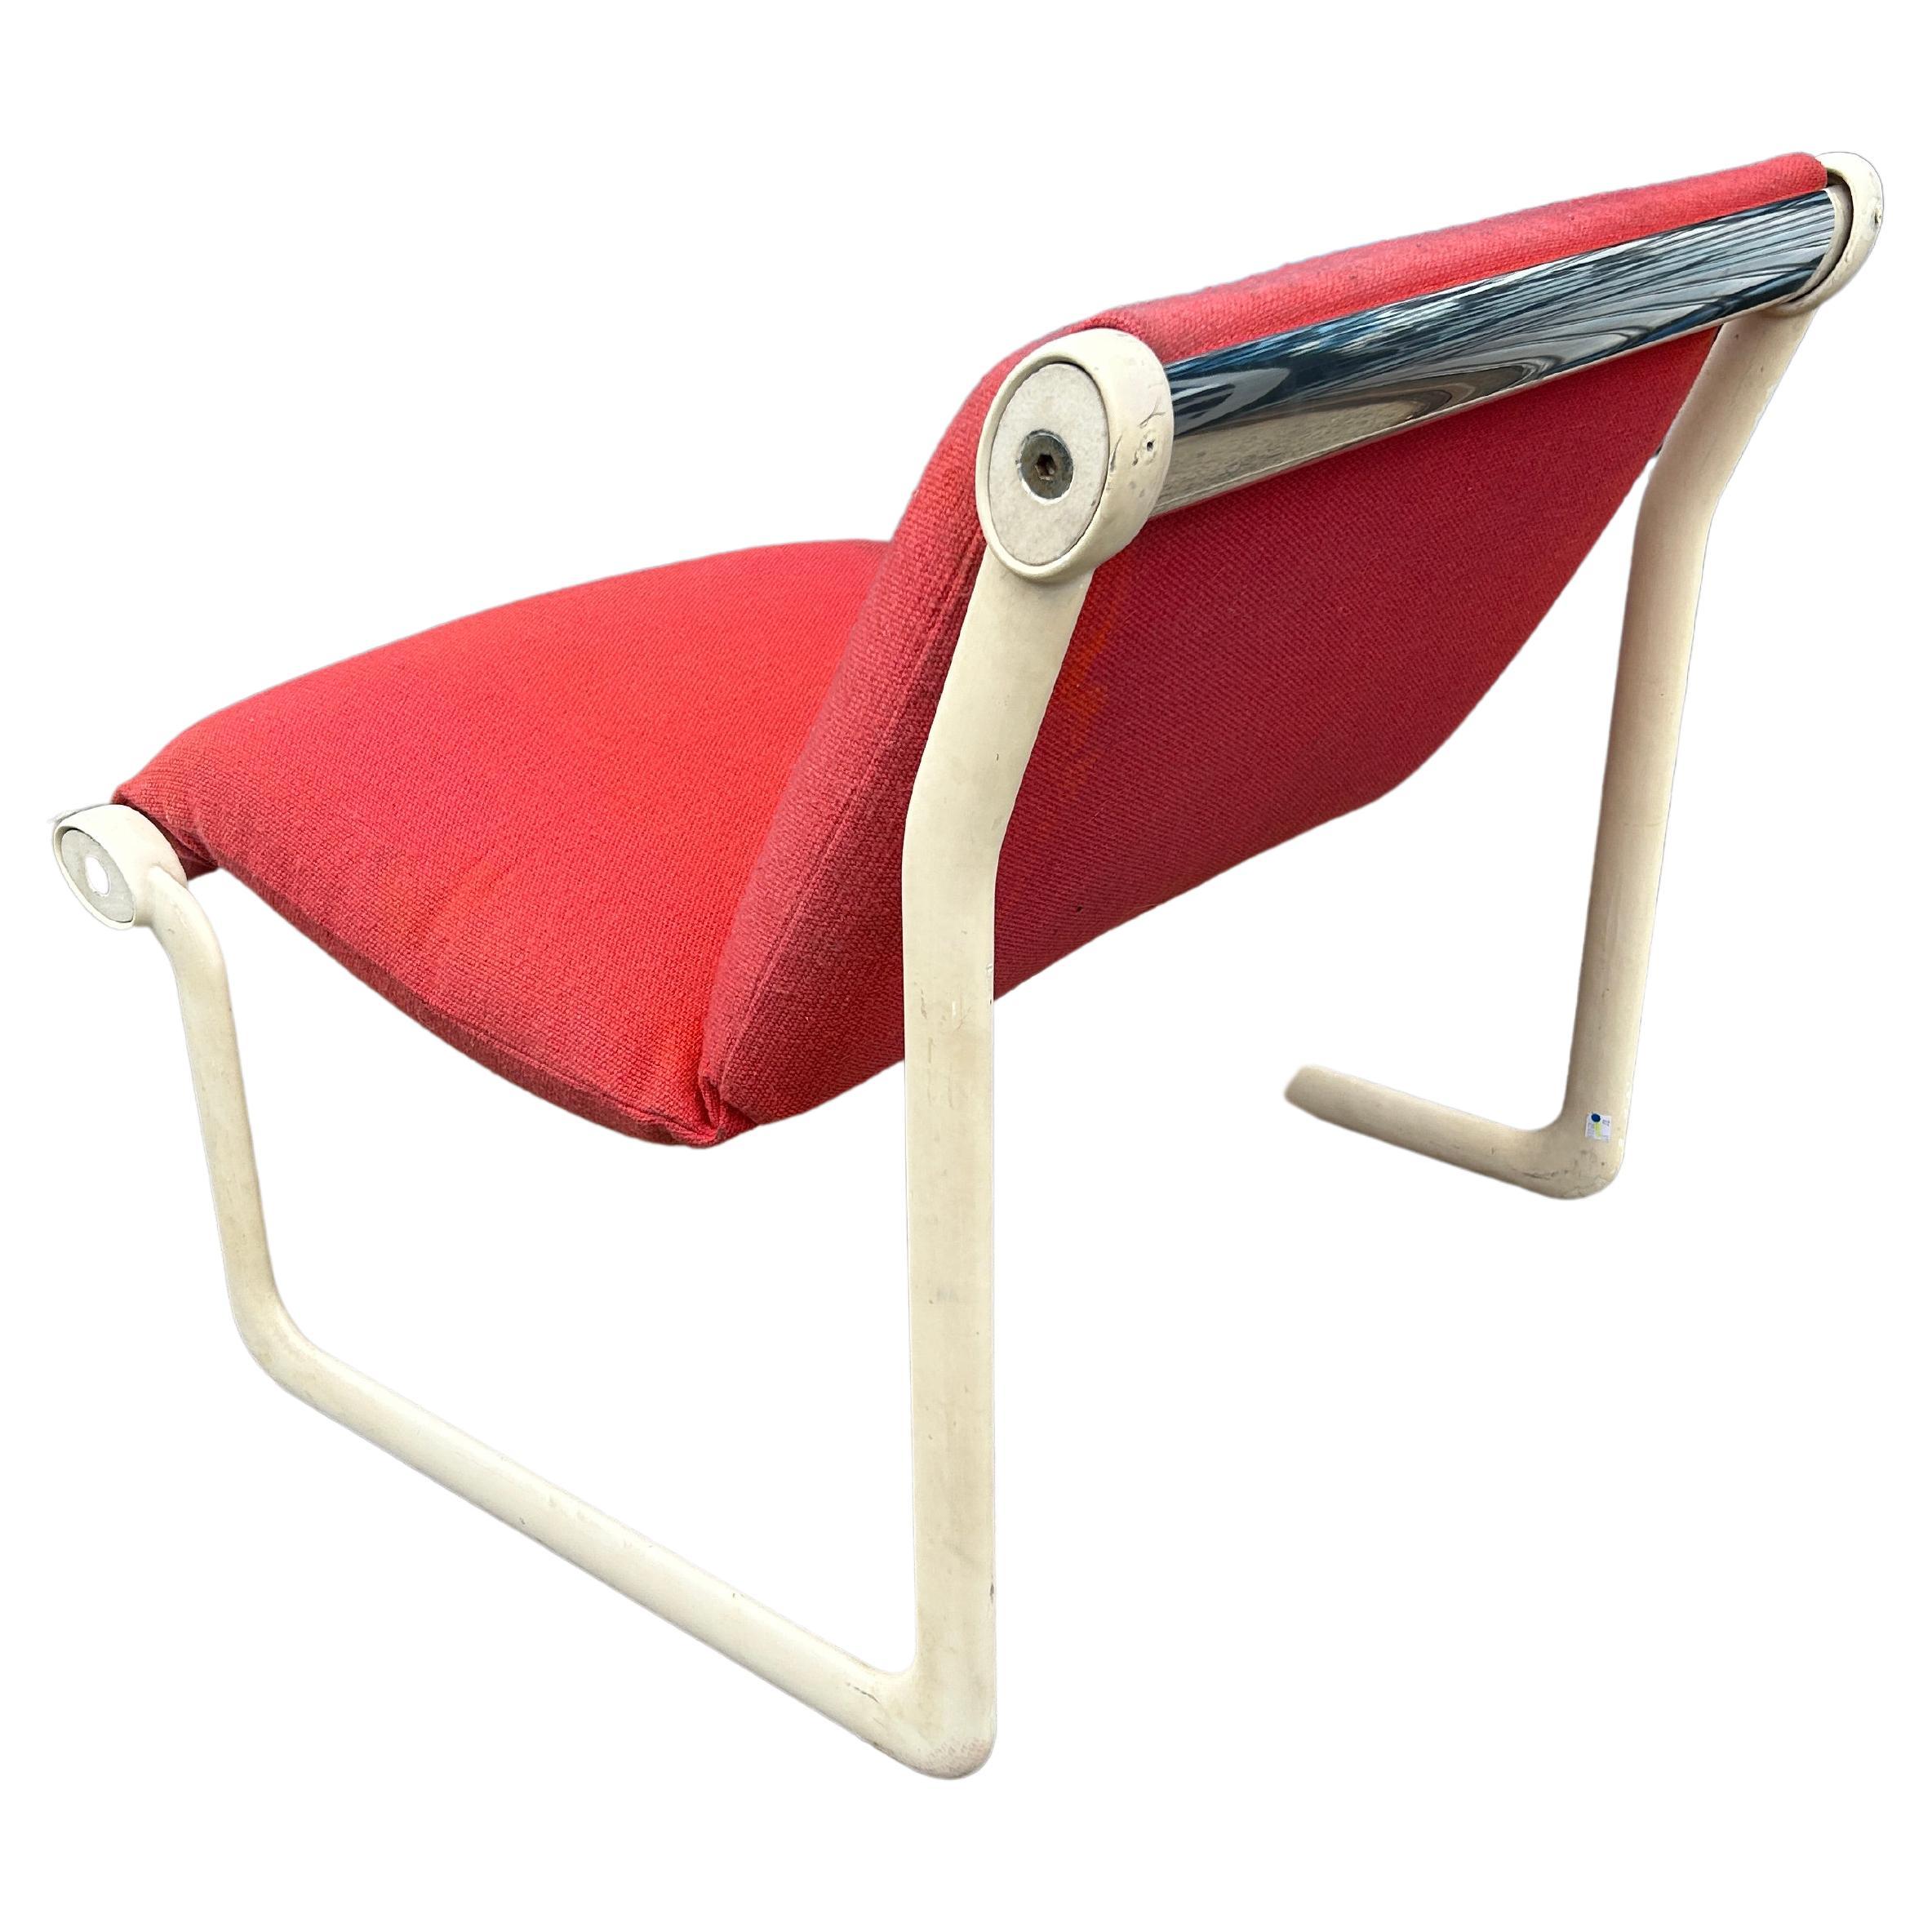 Mid Century Modern 1 Seat Chair by Bruce Hannah and Andrew Morrison for Knoll. Made in American circa 1960s. Designed by Bruce Hannah and Andrew Morrison for Knoll International in original red upholstery slung on white enamel Aluminum frames.